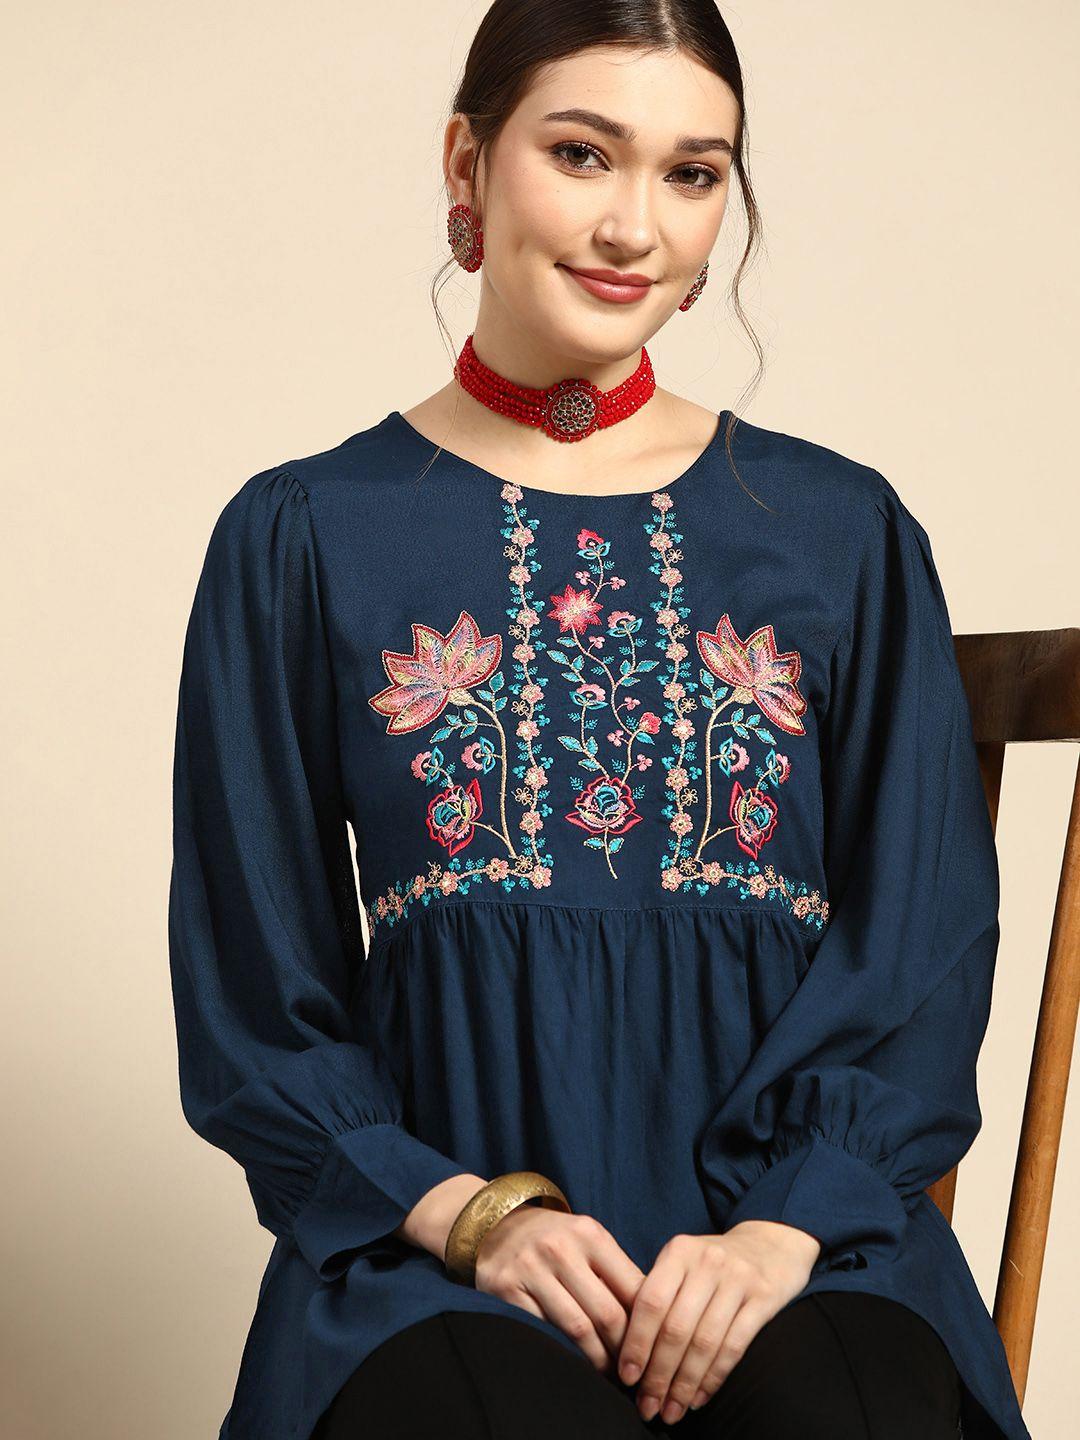 sangria teal blue & green ethnic motifs embroidered top